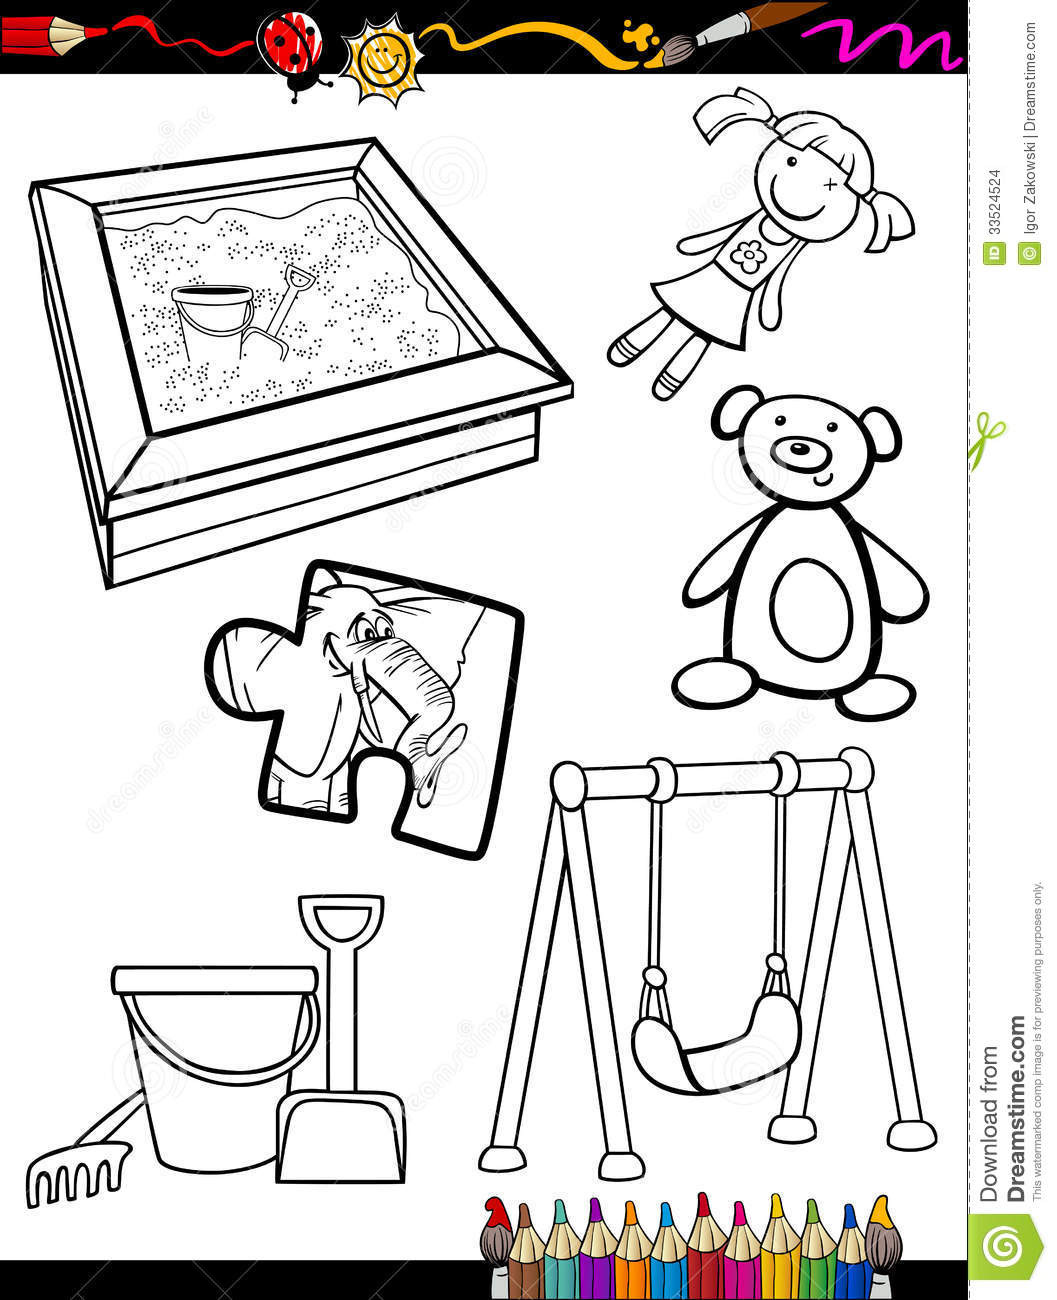 Kids Coloring Set
 Cartoon Toys Objects Coloring Page Stock Vector